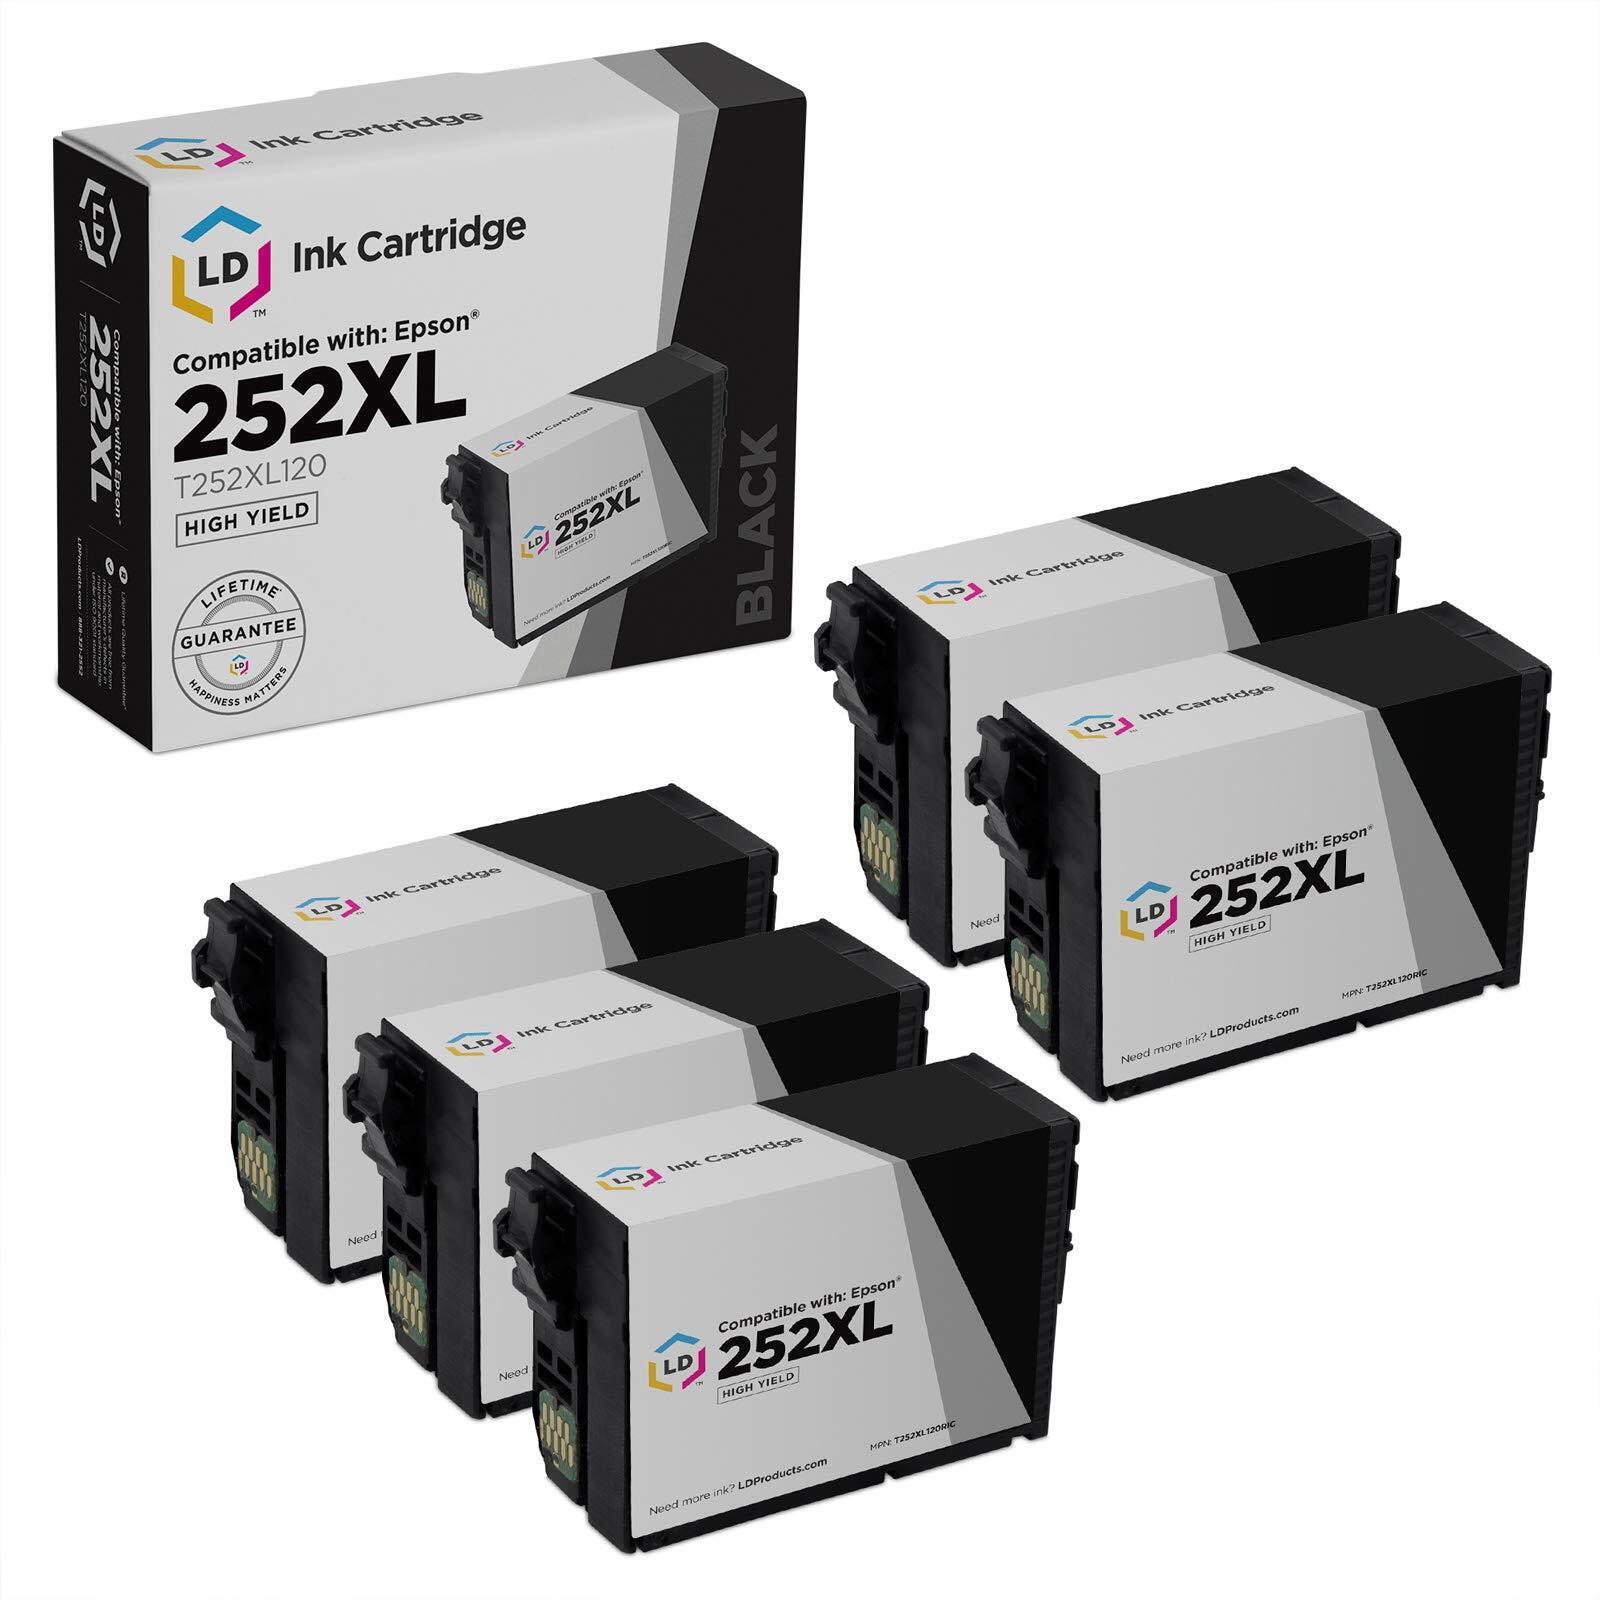 LD Reman Replacements for Epson T252XL120 5pk HY WF 3620 3640 7110 7610